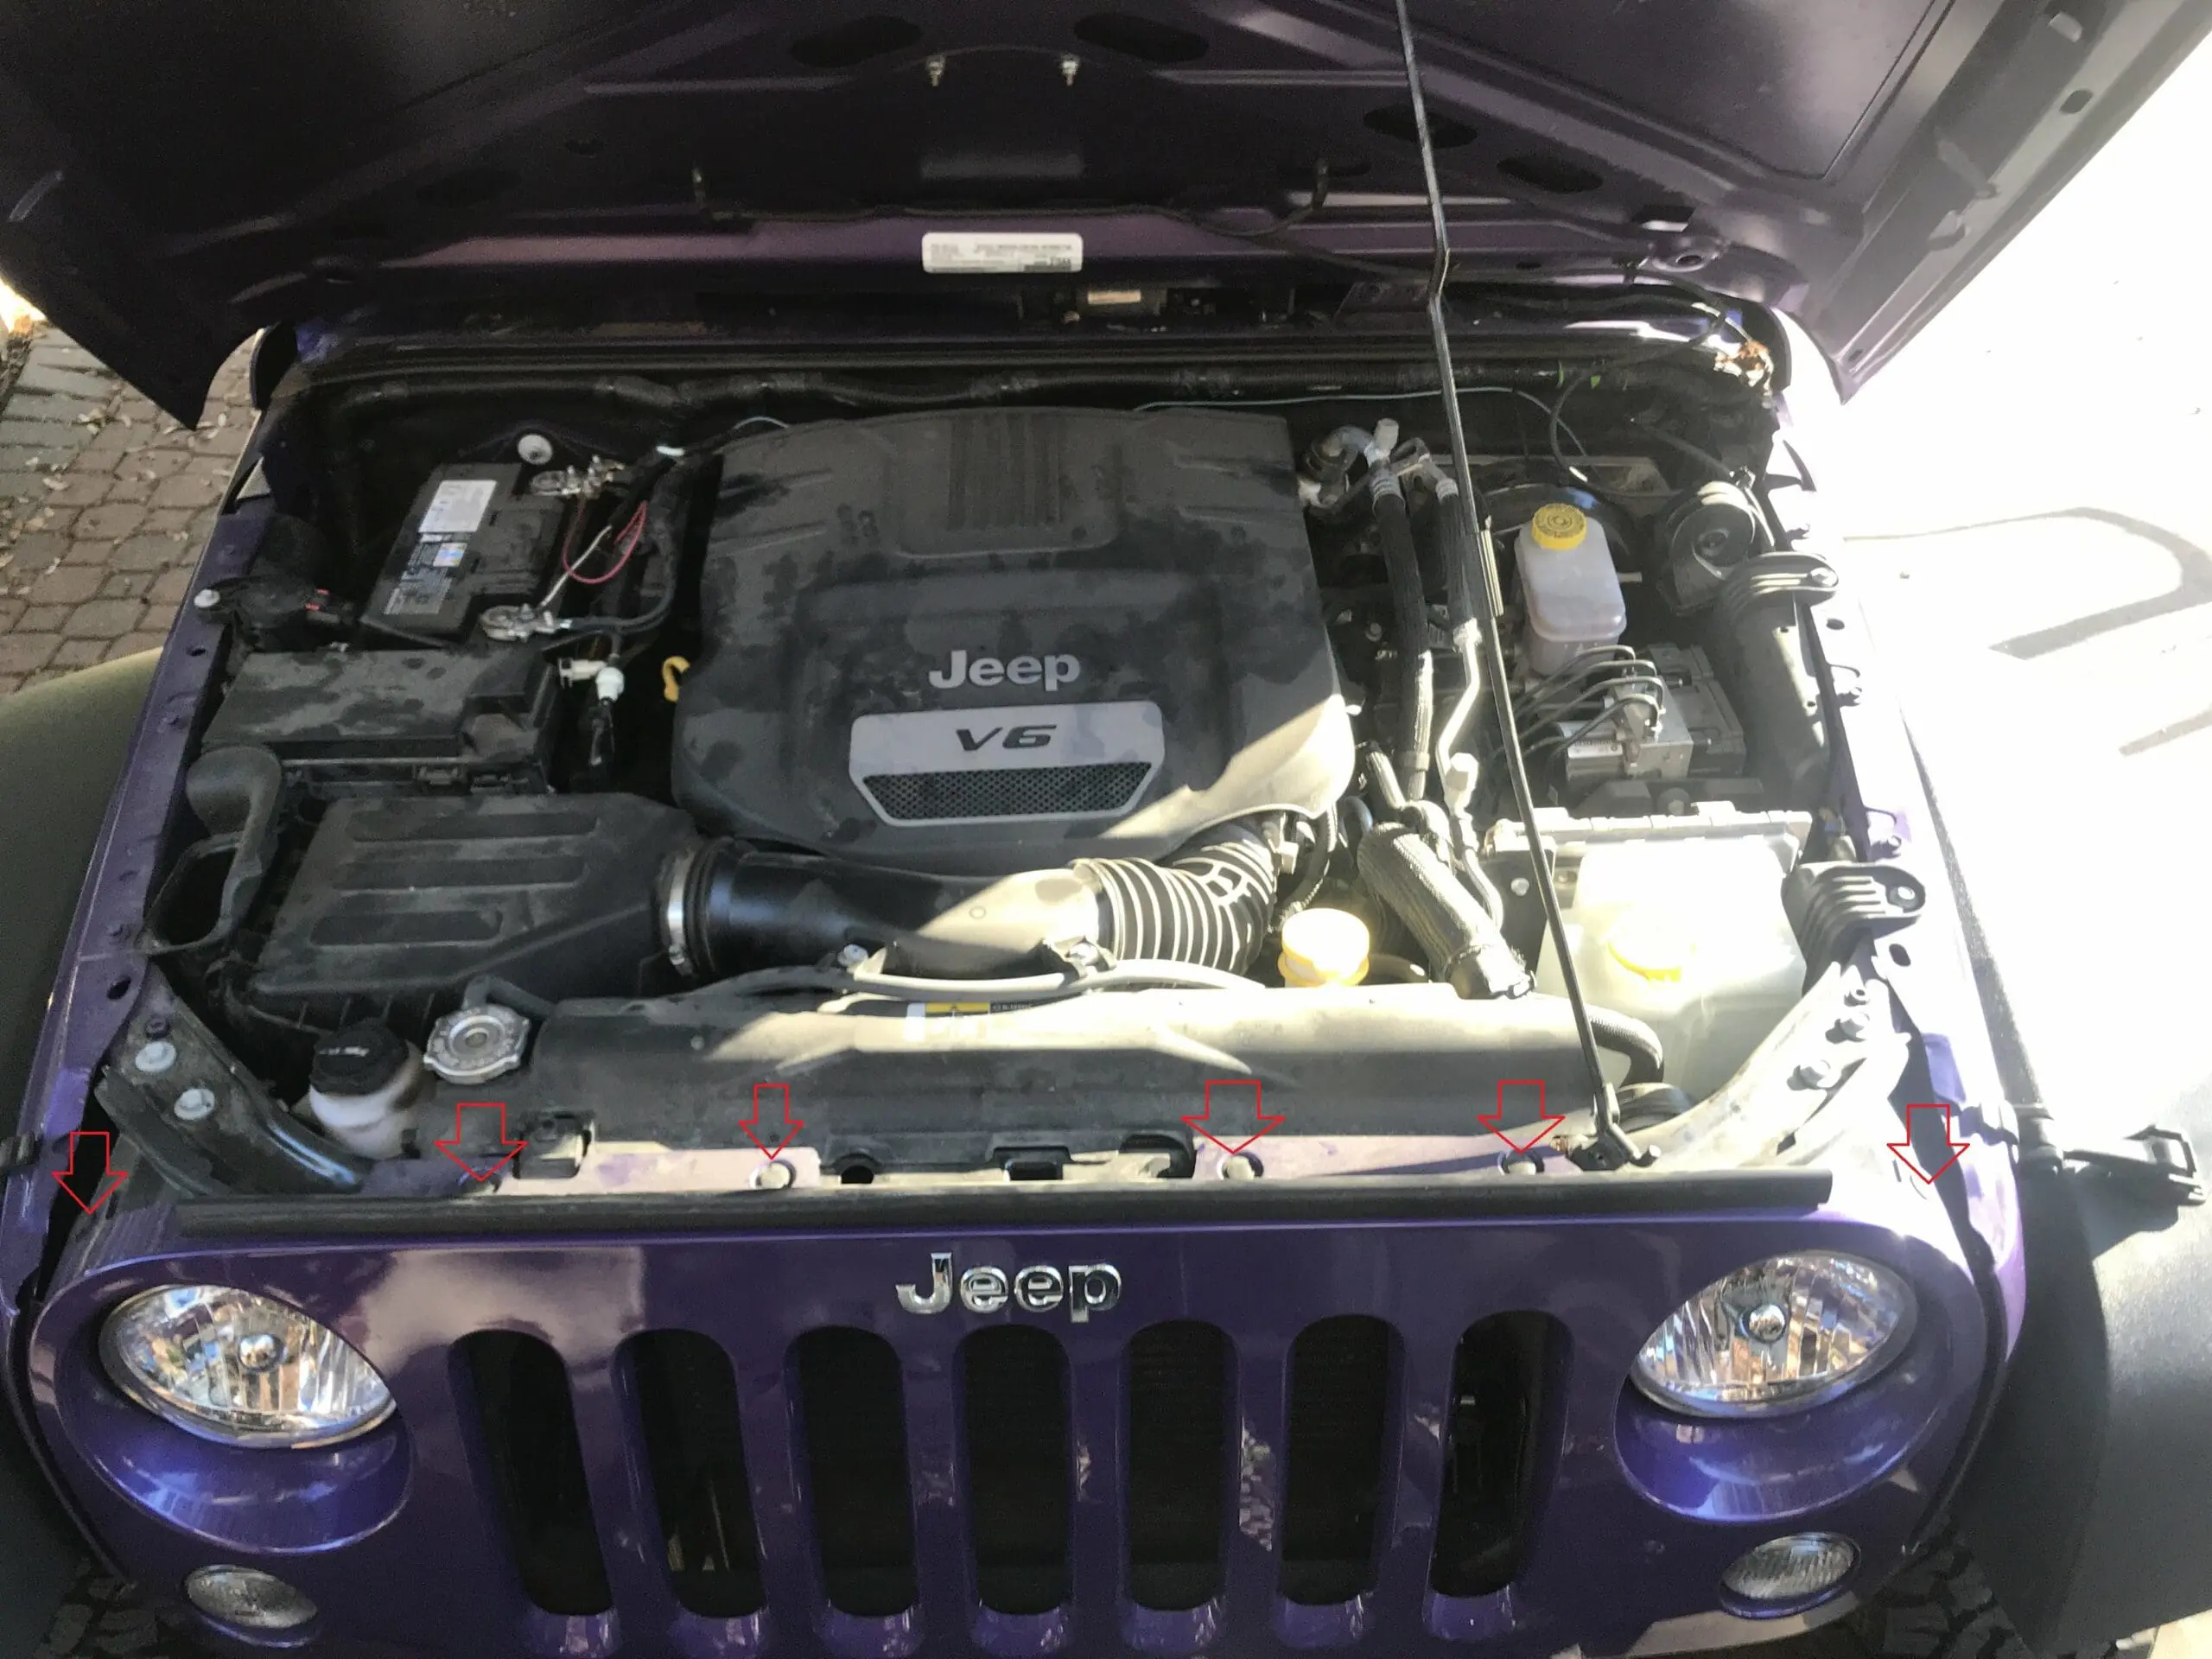 Jeep Wrangler Grill removal